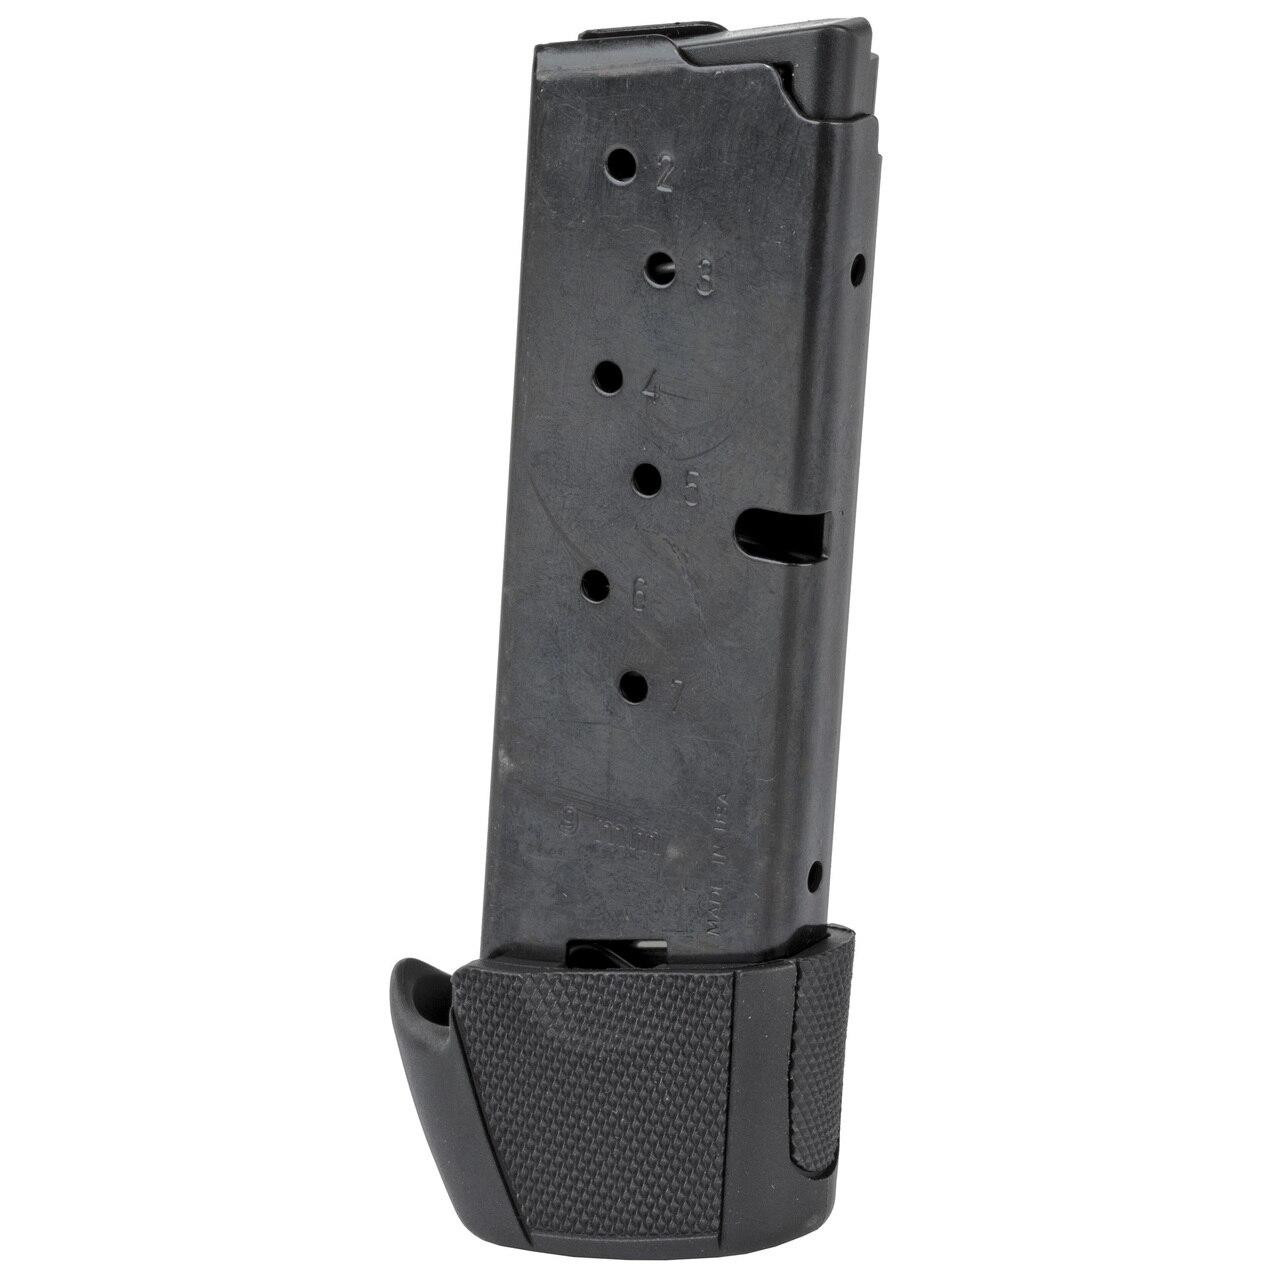 Ruger Mag Ruger Lc9/ec9s 9mm 9rd Bl W/ext 736676904044